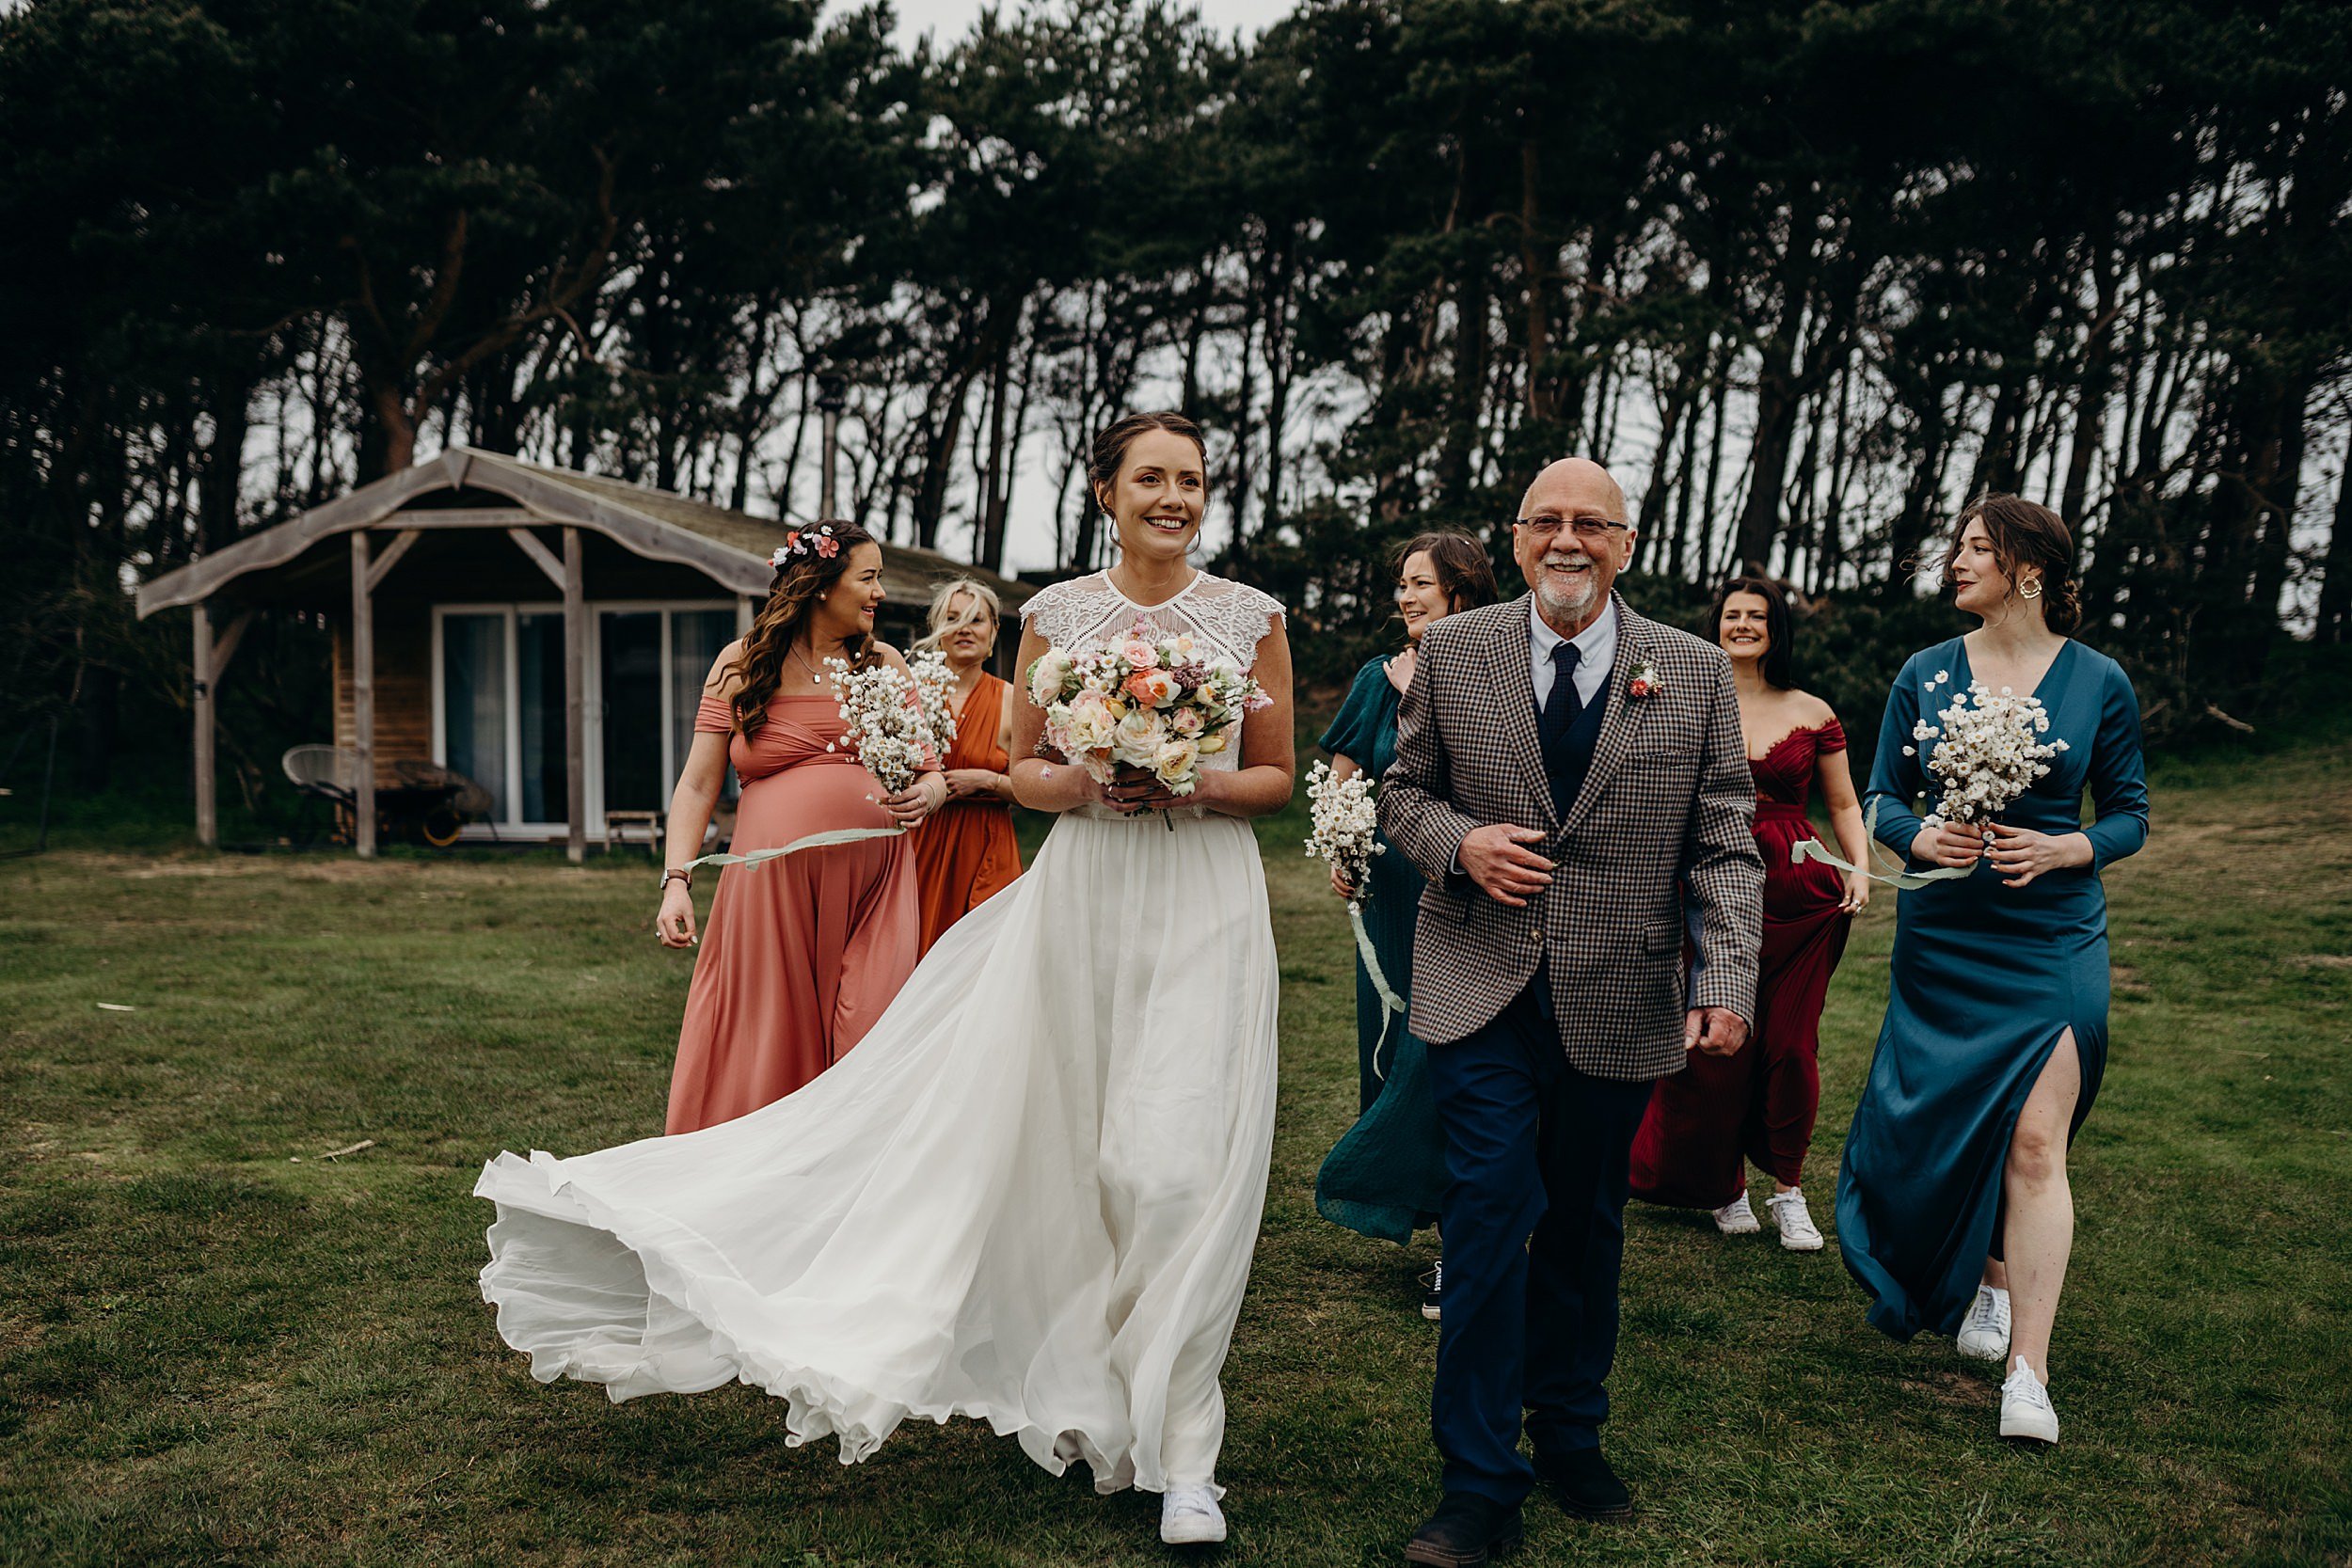 a bride and her father arrive for her harvest moon wedding ceremony accompanied by her bridesmaids in colourful dresses trees are visible in the background